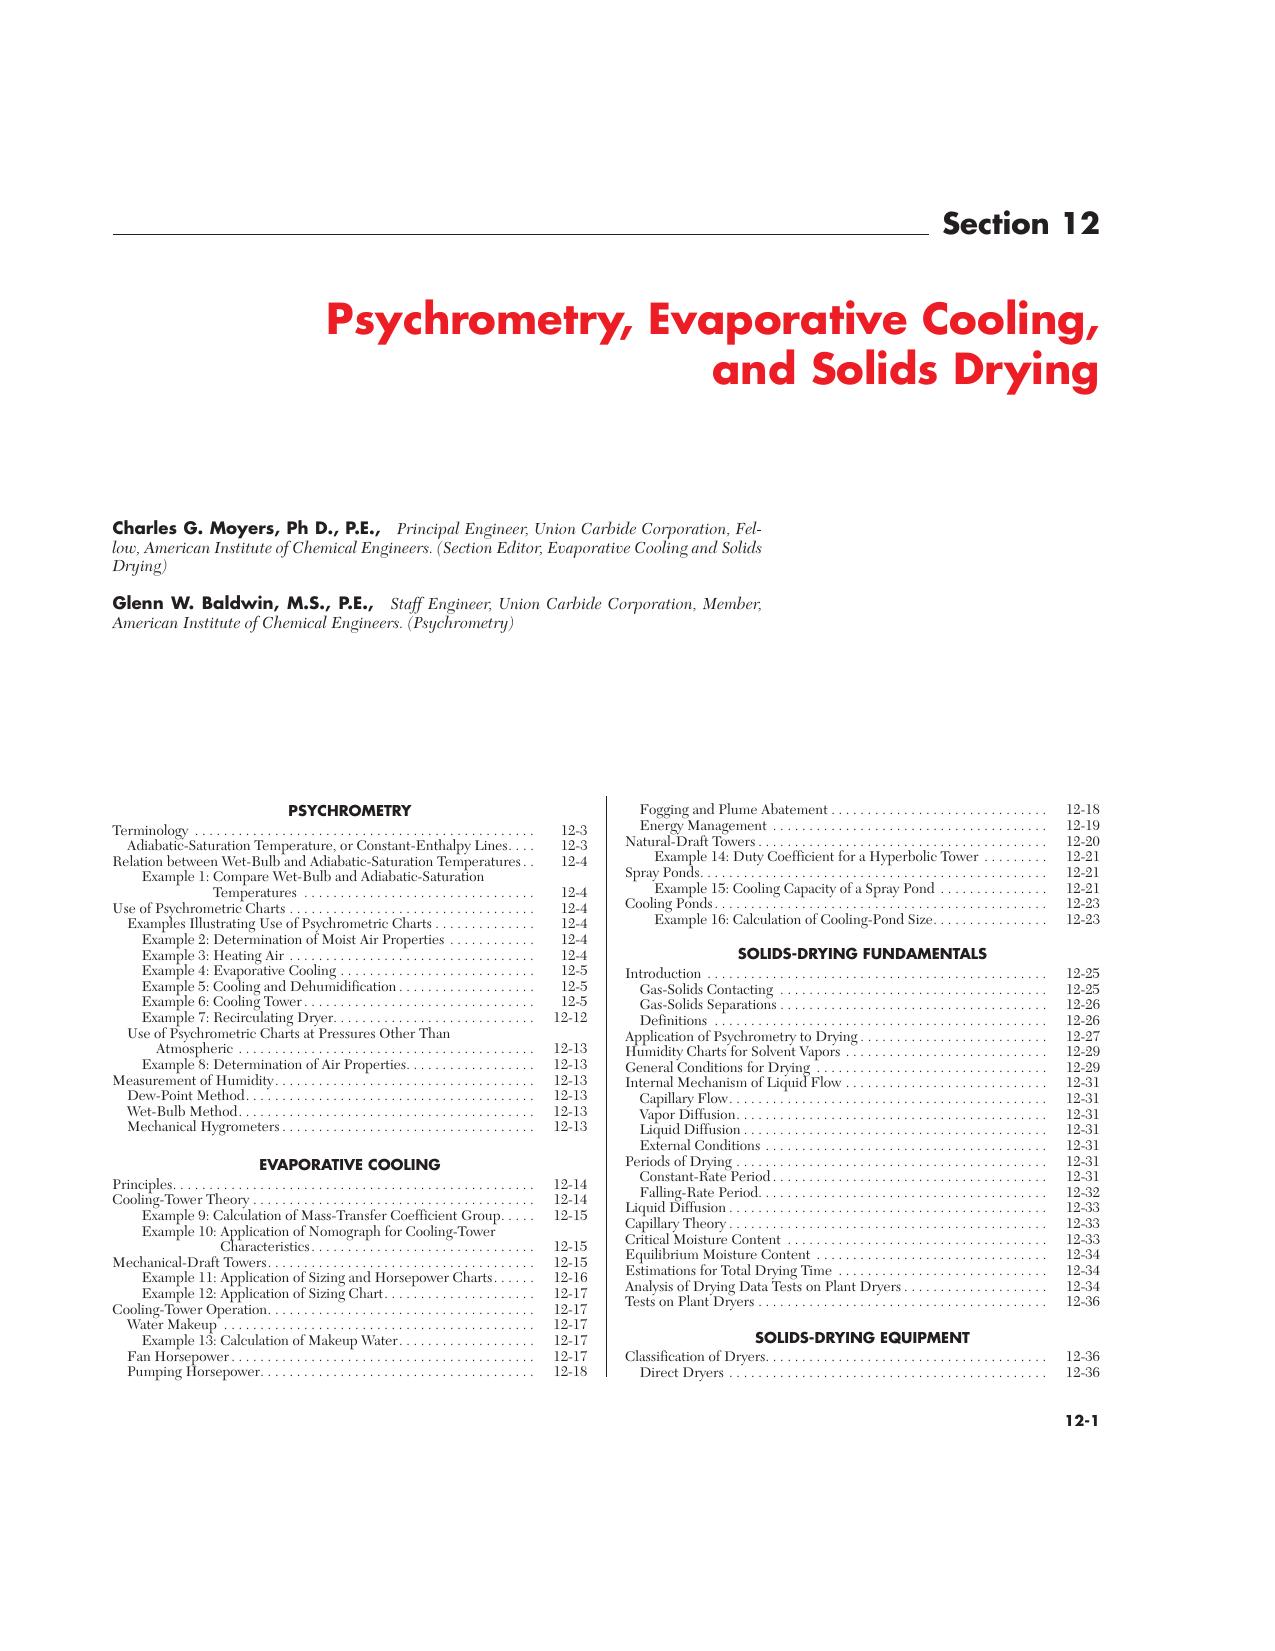 Psychrometry, Evaporative Cooling, and Solids Drying